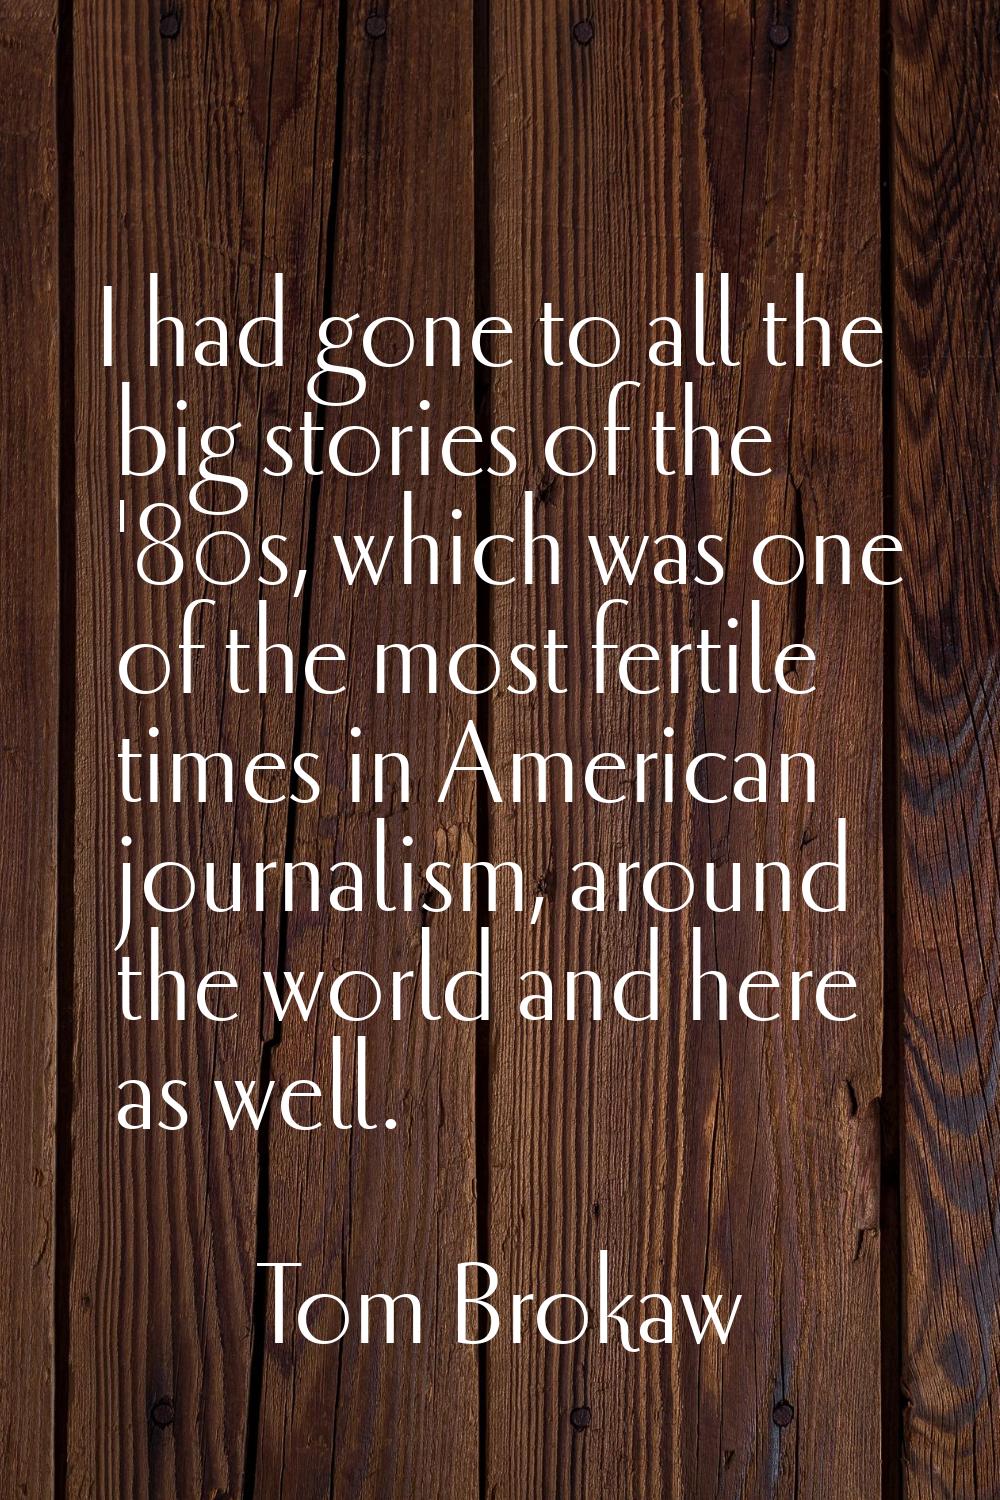 I had gone to all the big stories of the '80s, which was one of the most fertile times in American 